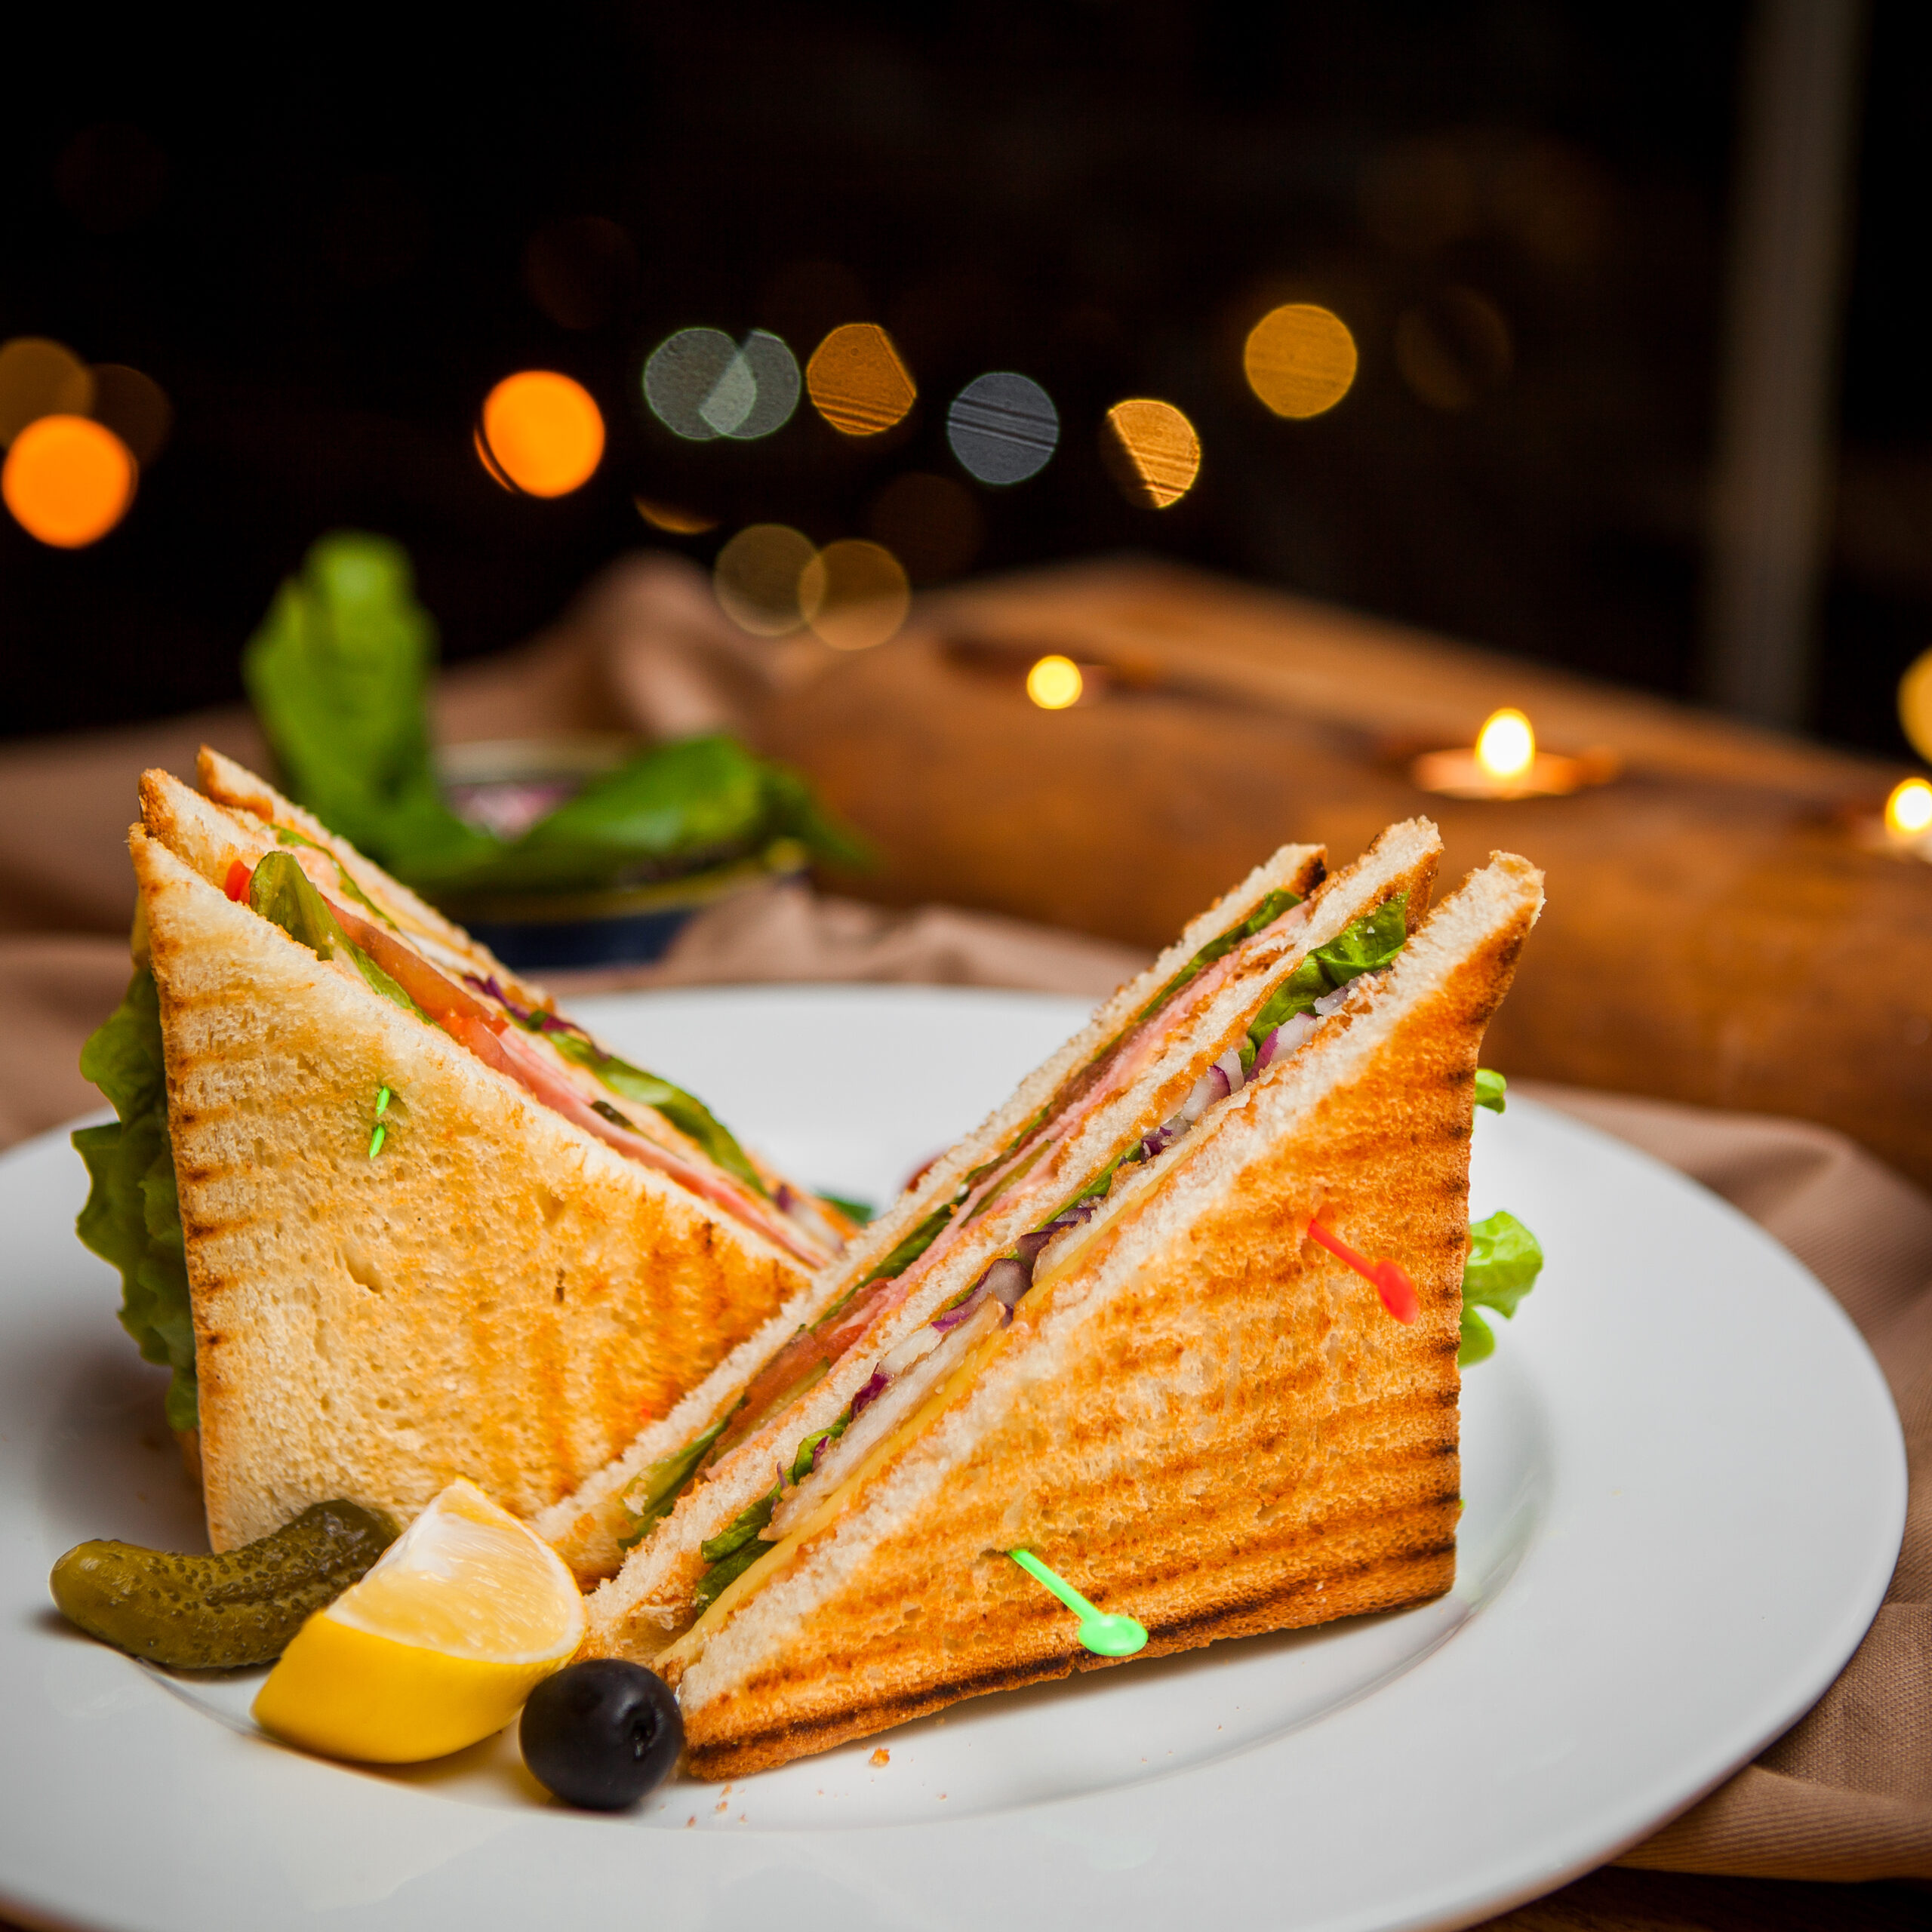 Side view club sandwich with salted cucumbers and lemon and olives in round white plate on wooden background